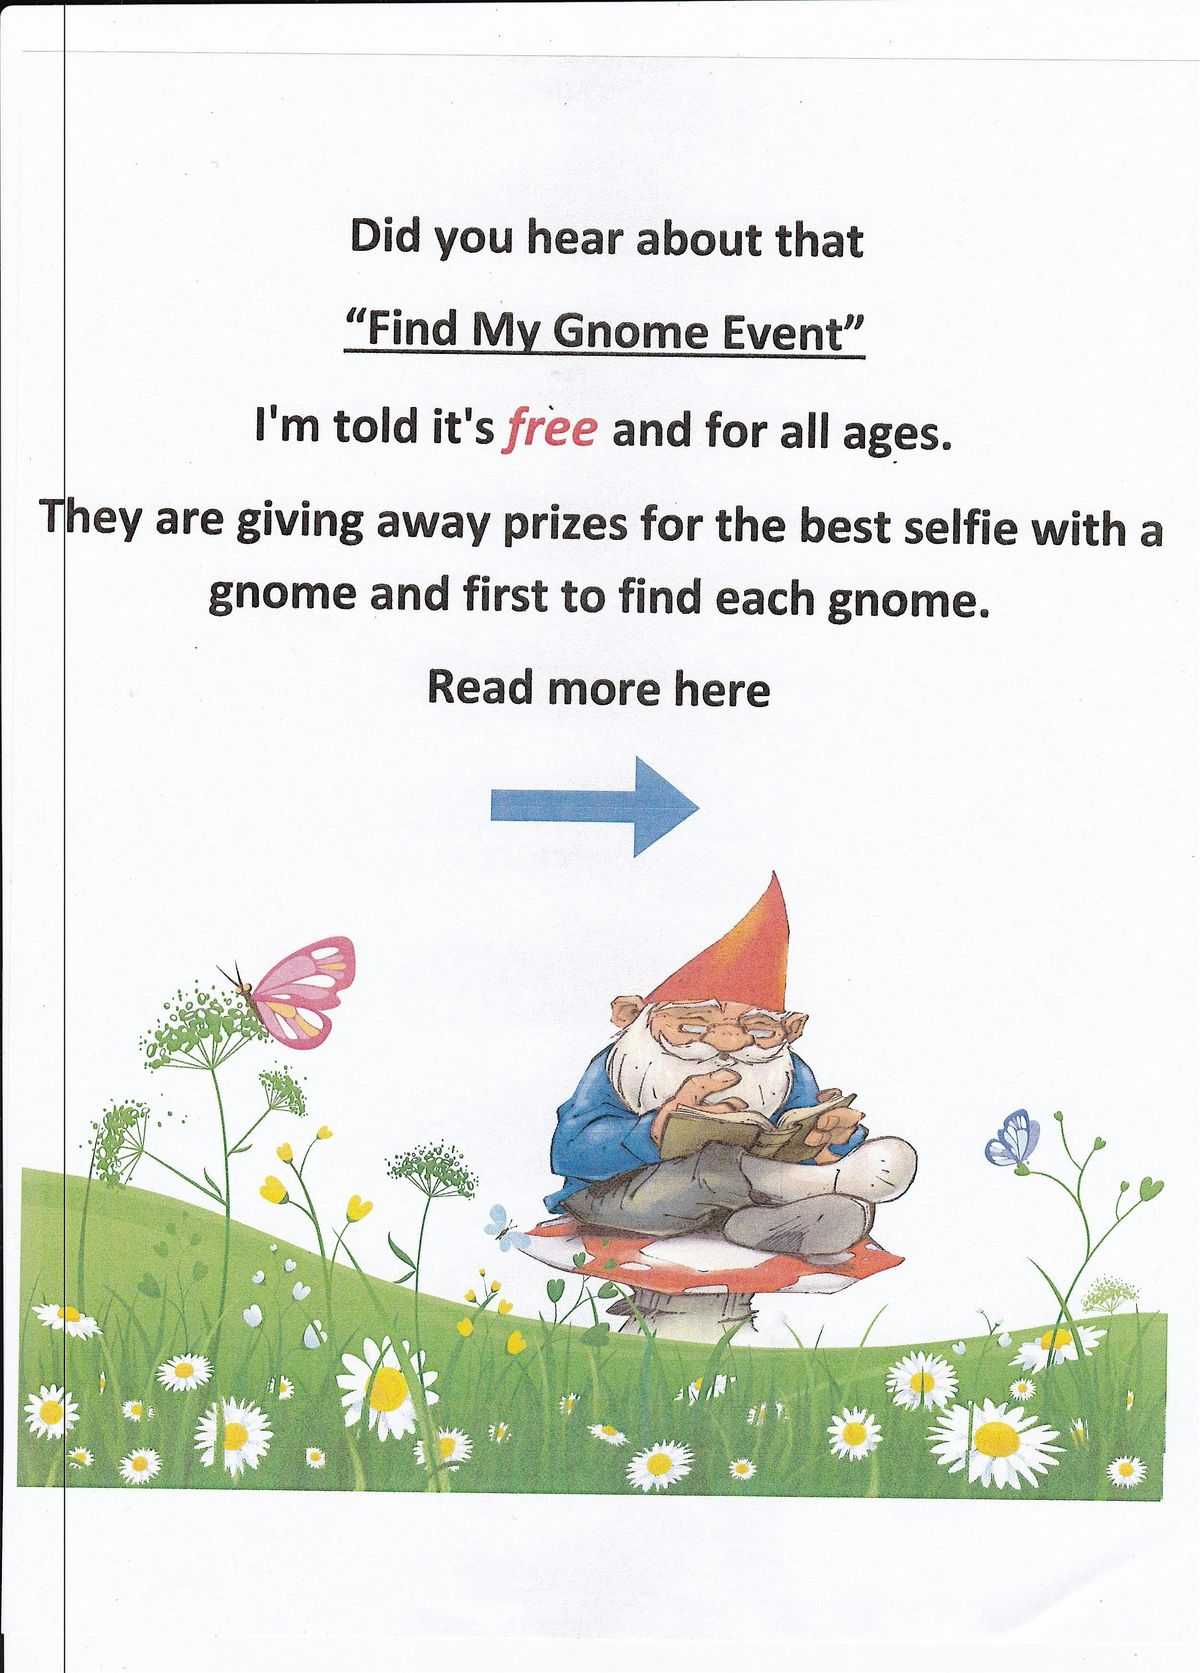 Find My Gnome Event